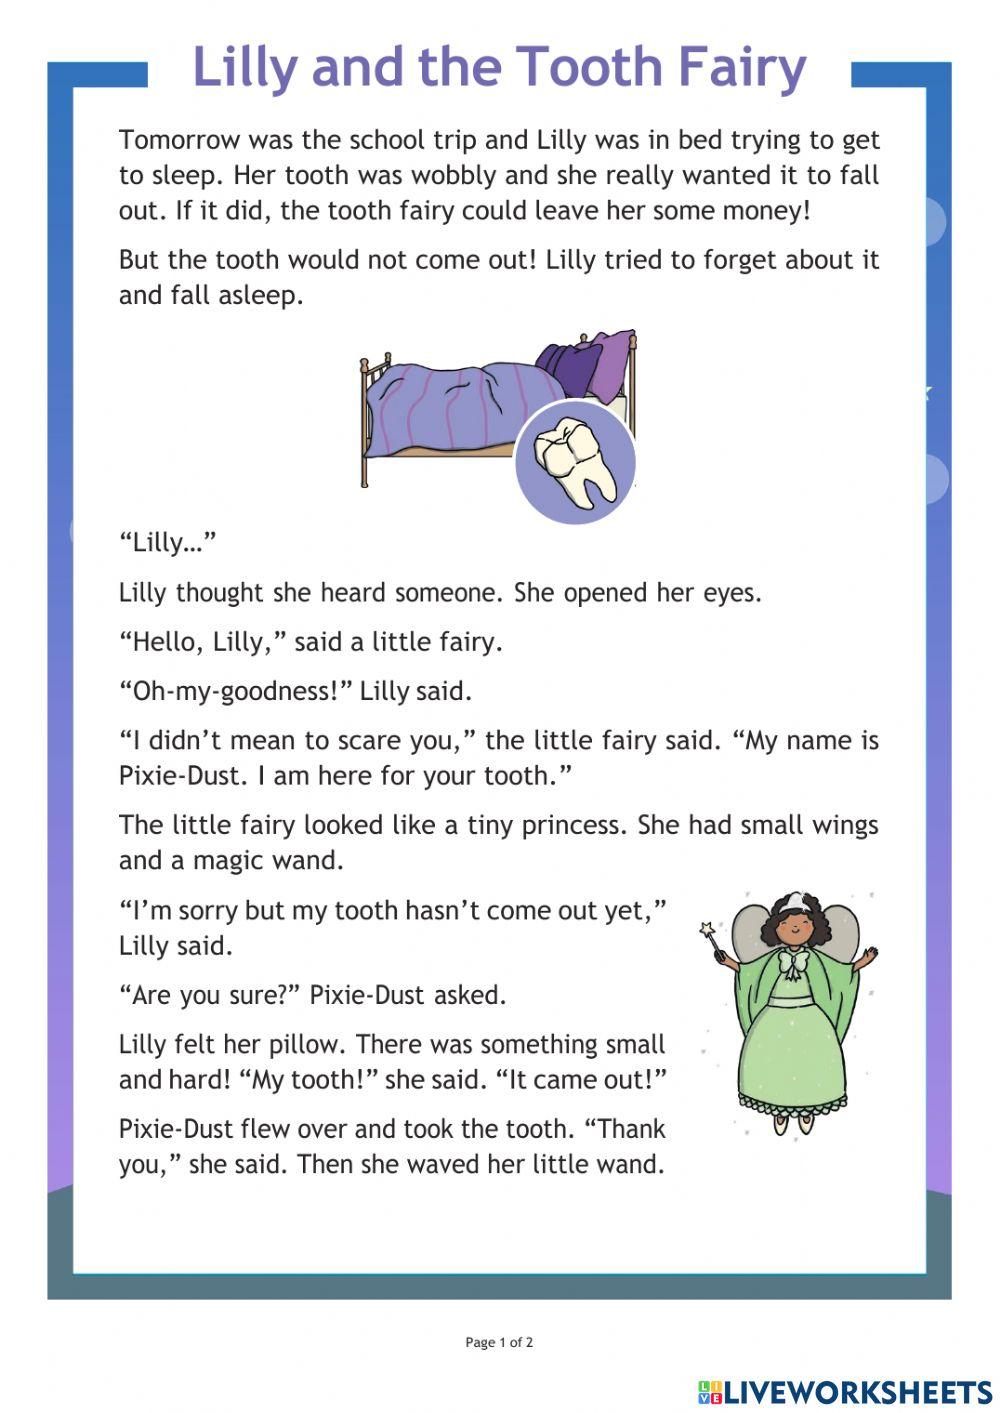 Lilly and the Tooth Fairy